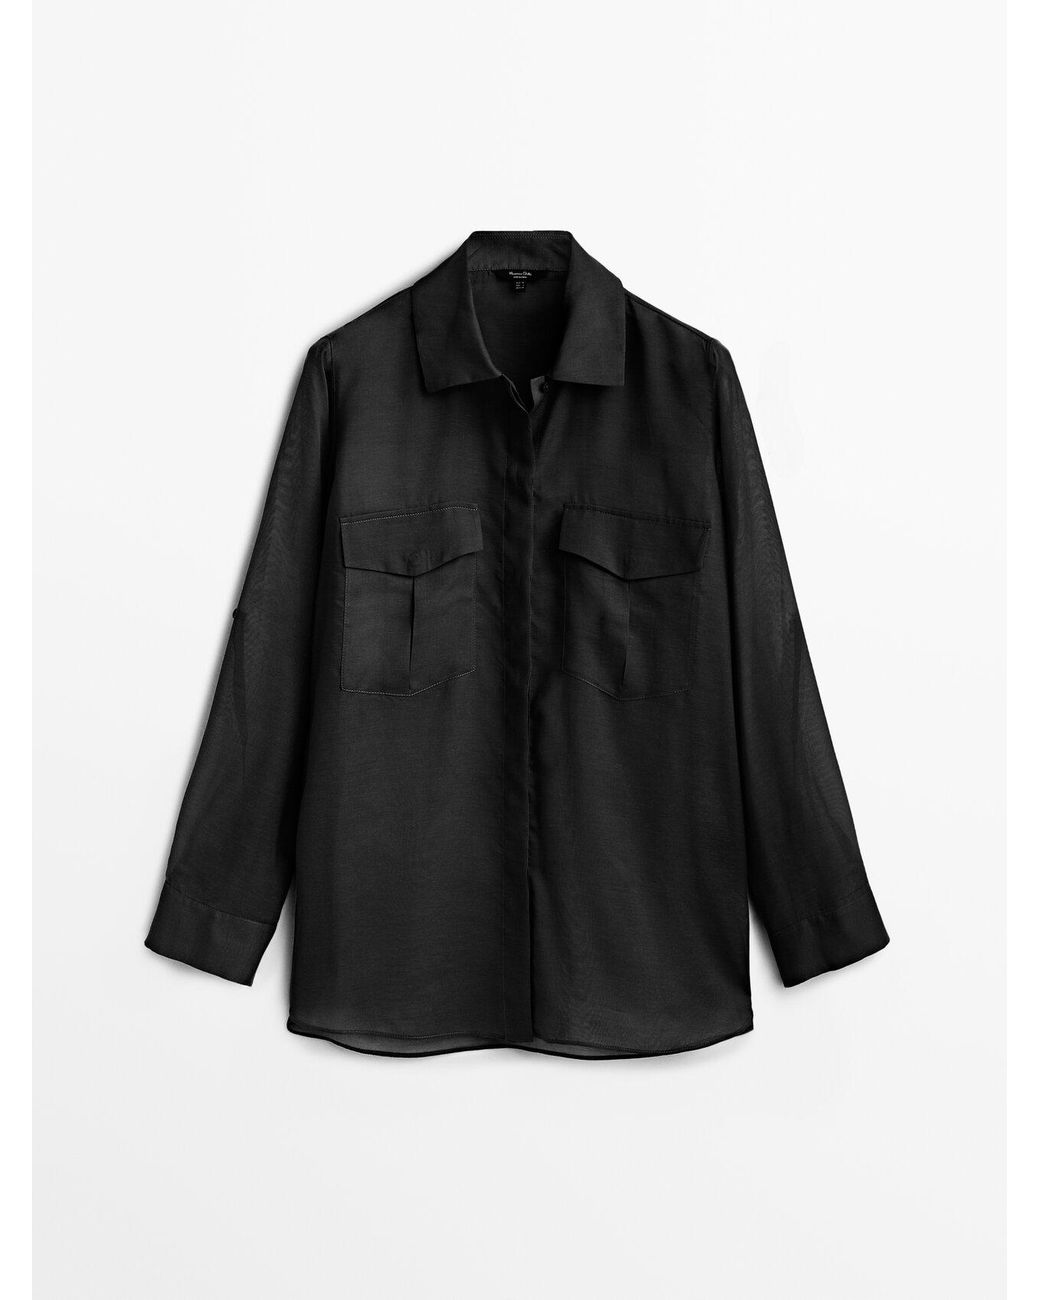 MASSIMO DUTTI Semi-sheer Shirt With Pockets in Black | Lyst